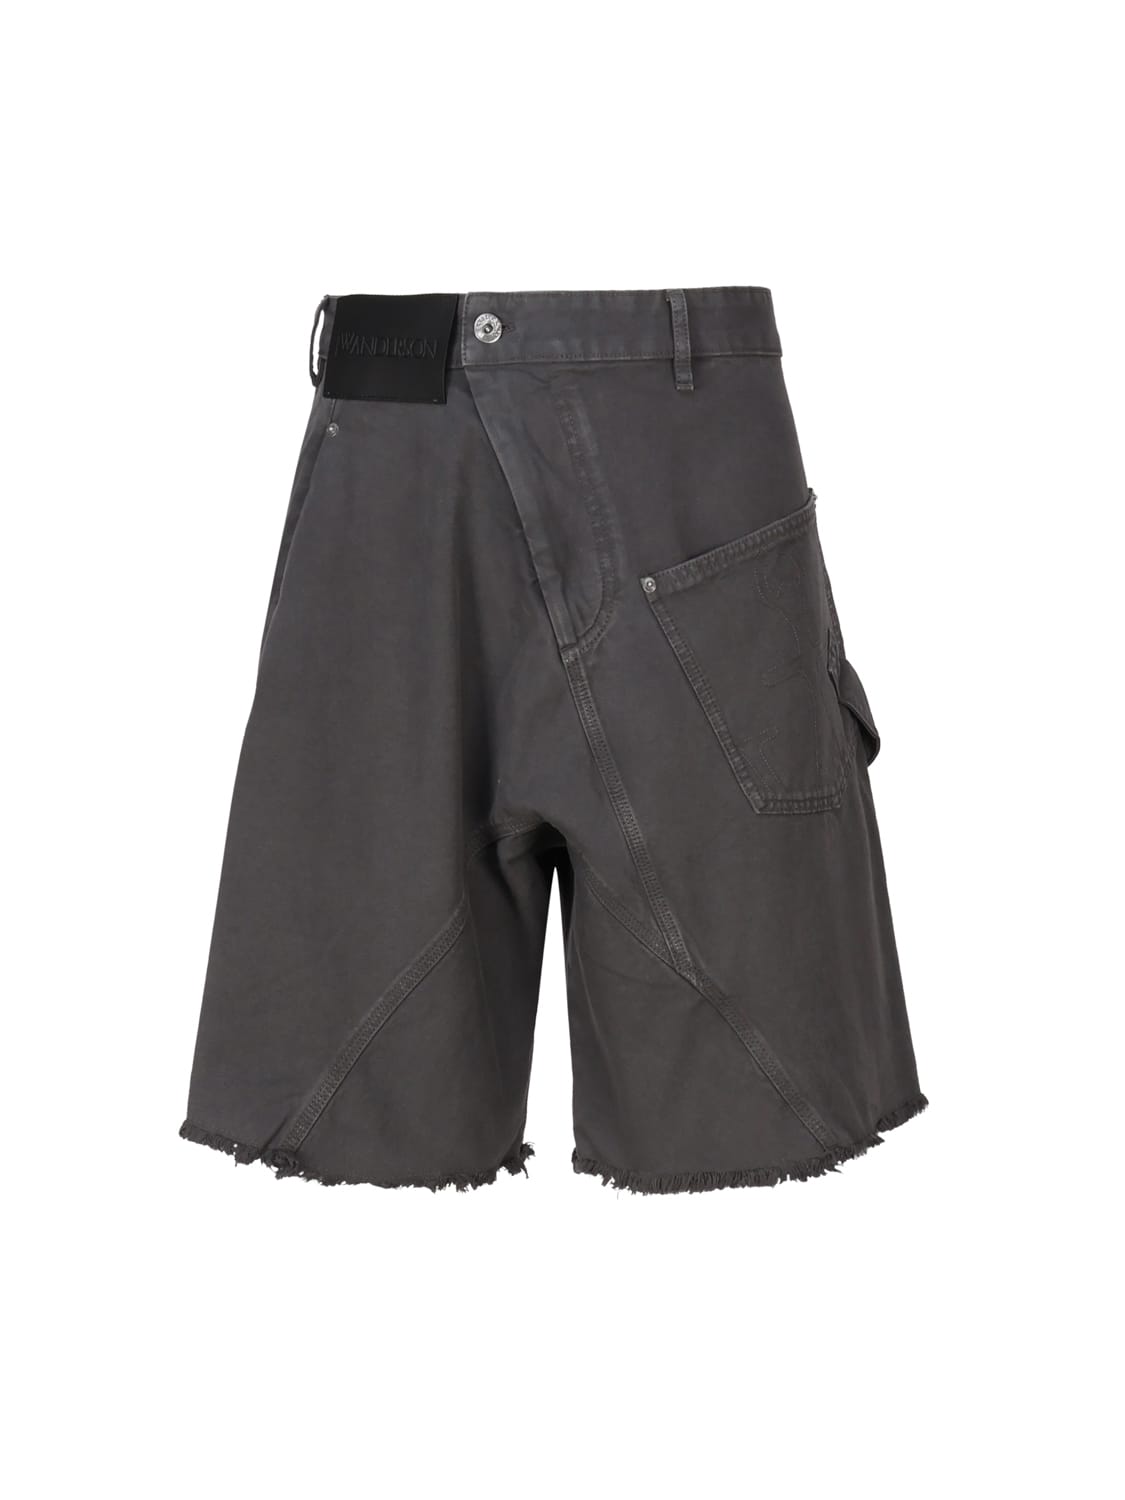 J.W. Anderson Deconstructed Shorts